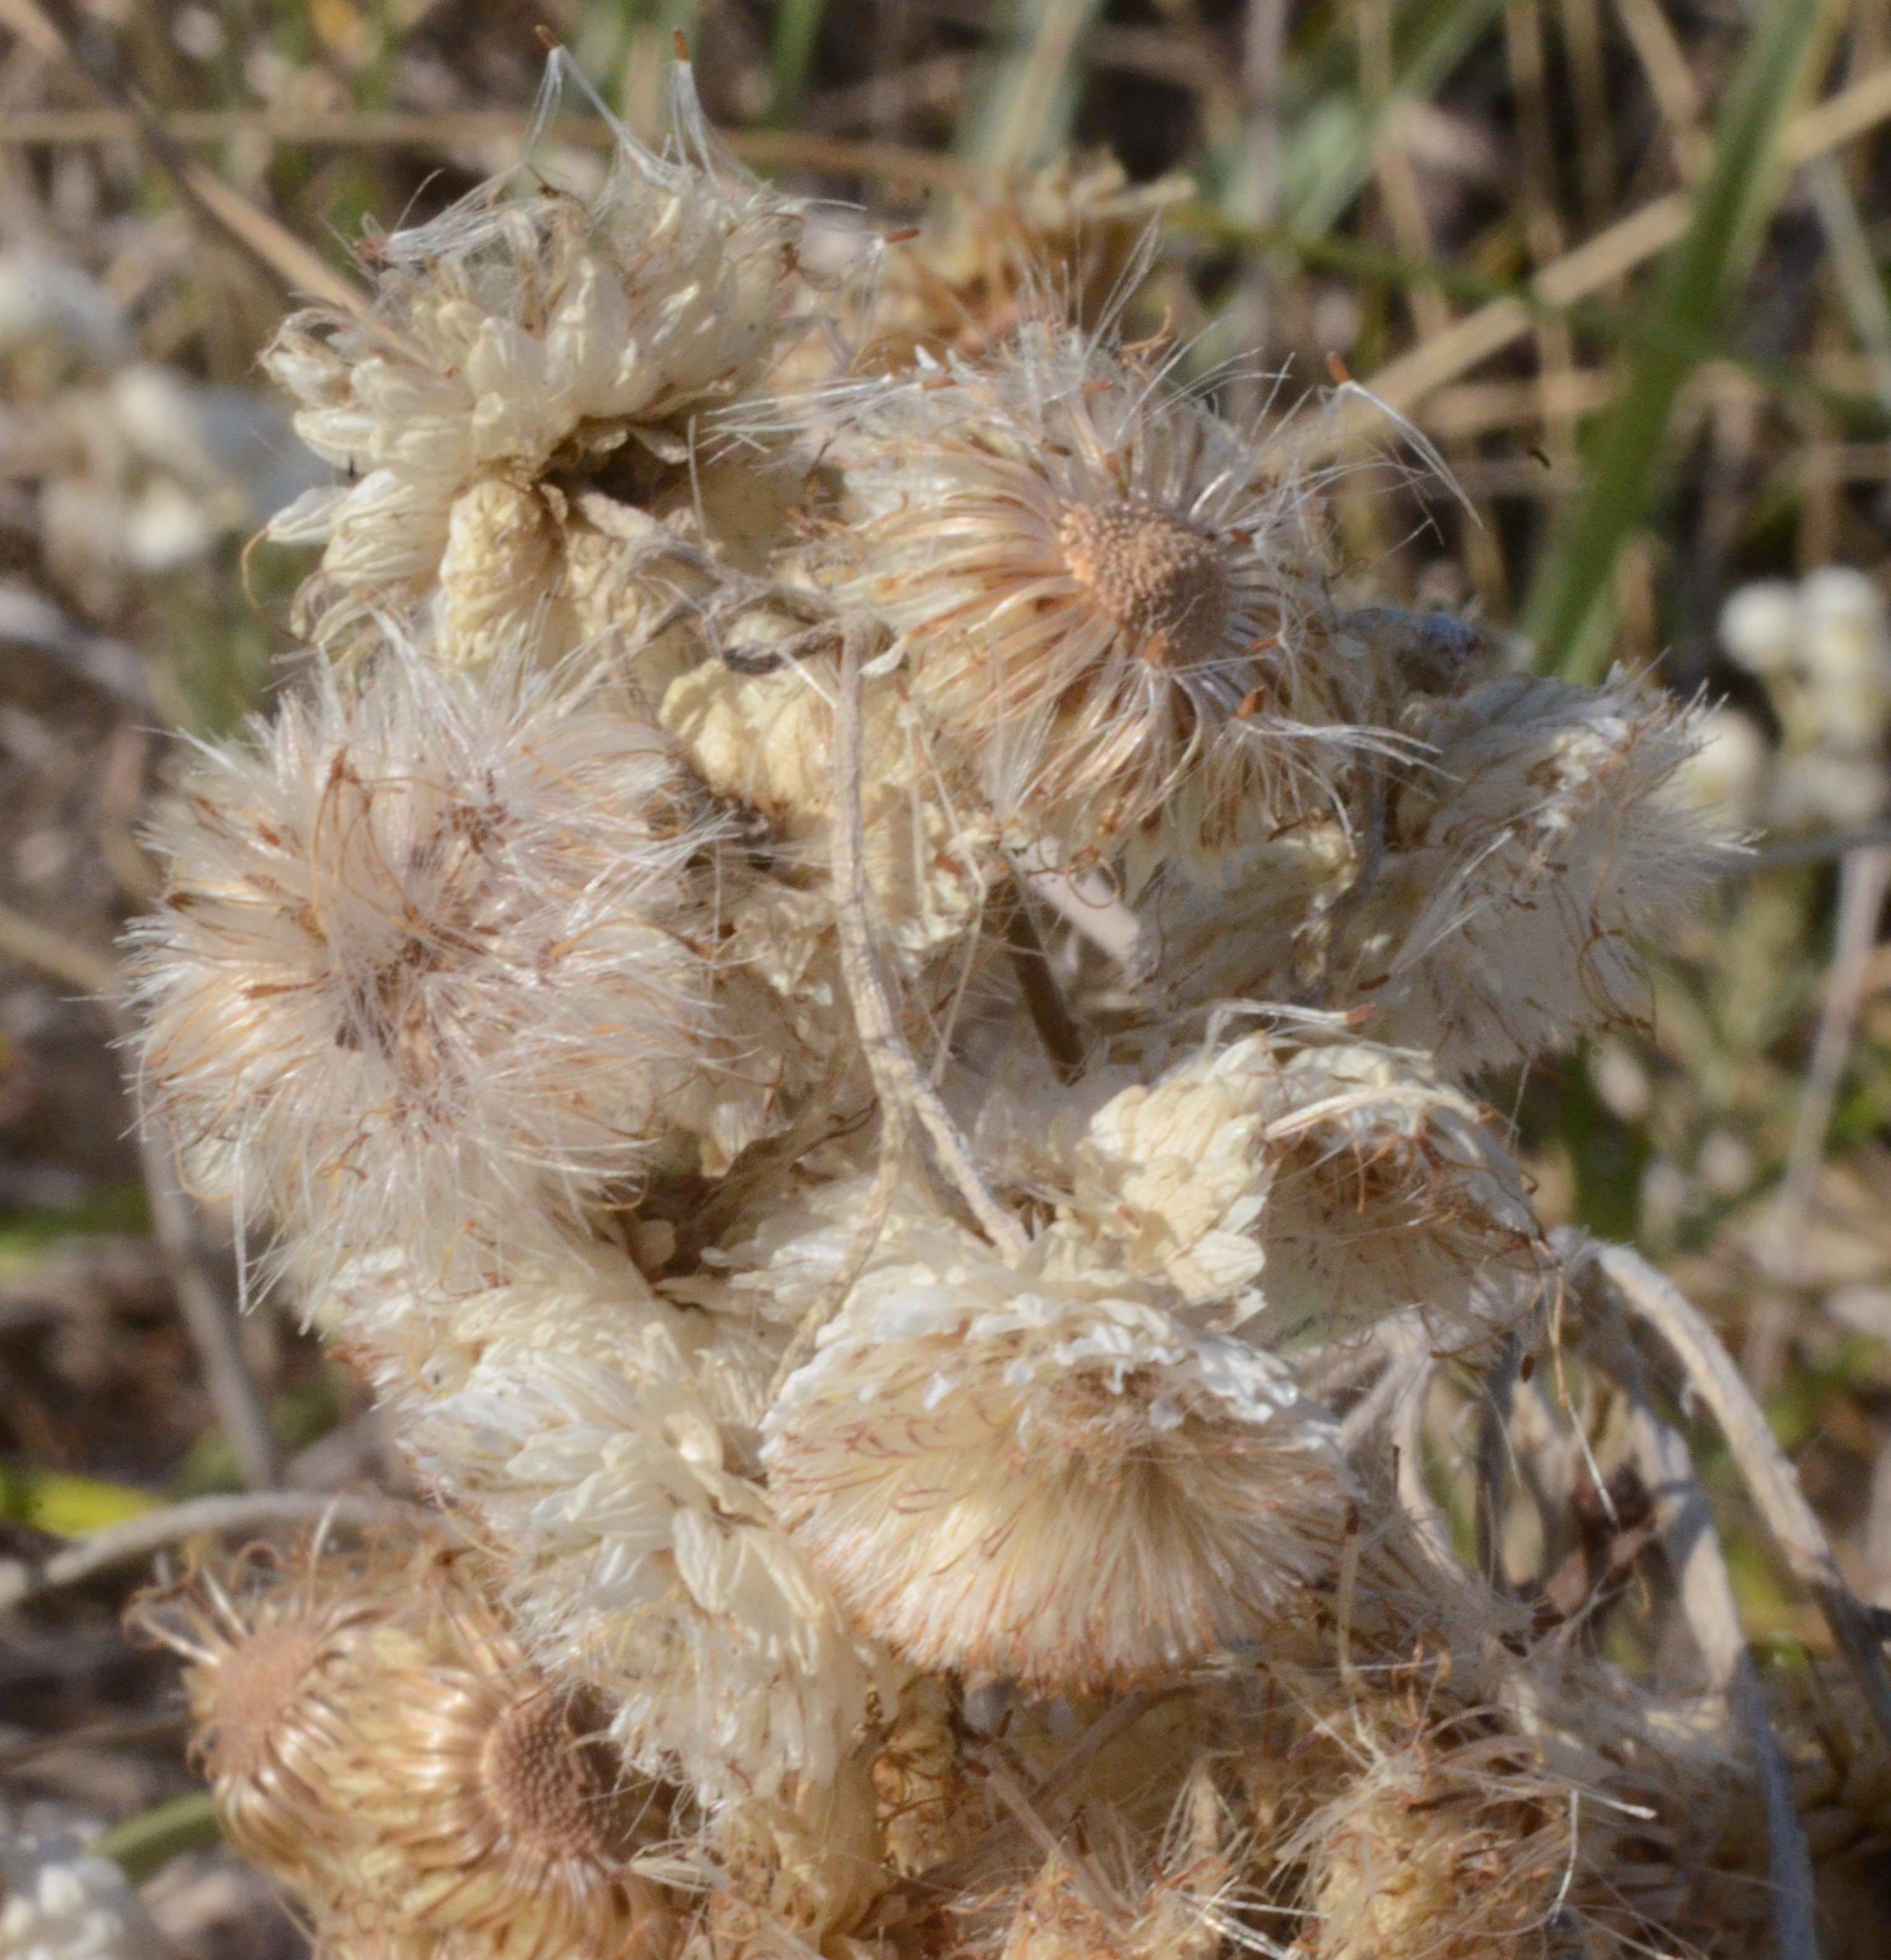 Anaphalis margaritacea fruits that are dispersing. Fruits are small and brown and long, floss-like, white tissue that aids in wind transport. 